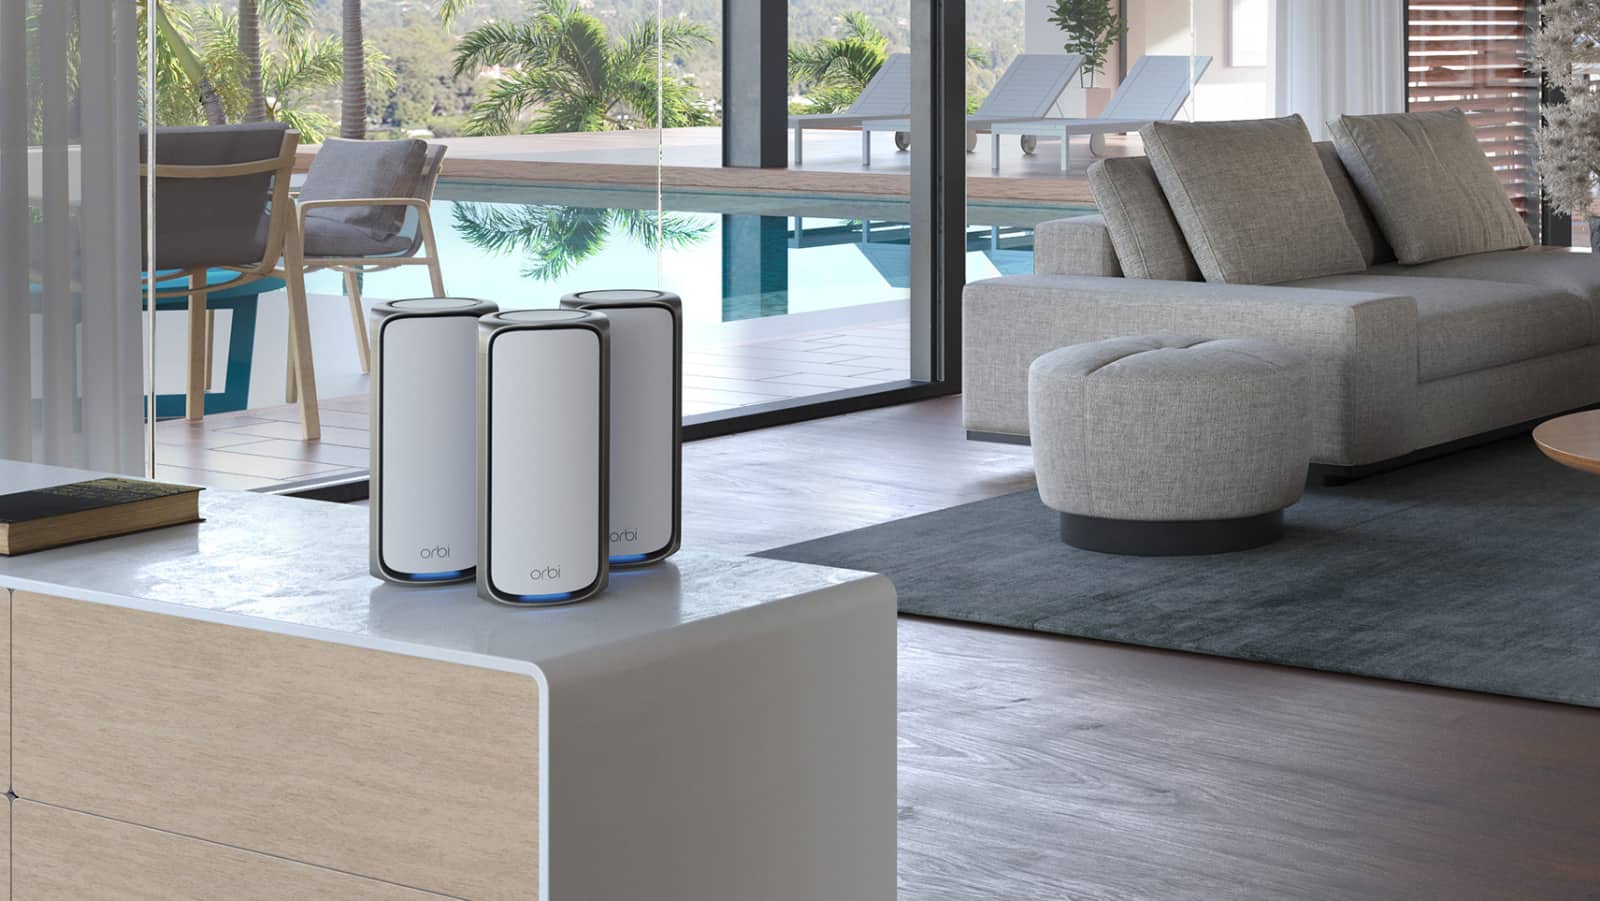 The Orbi 970 three-pack is over $4K worth of networking gear. Yikes.